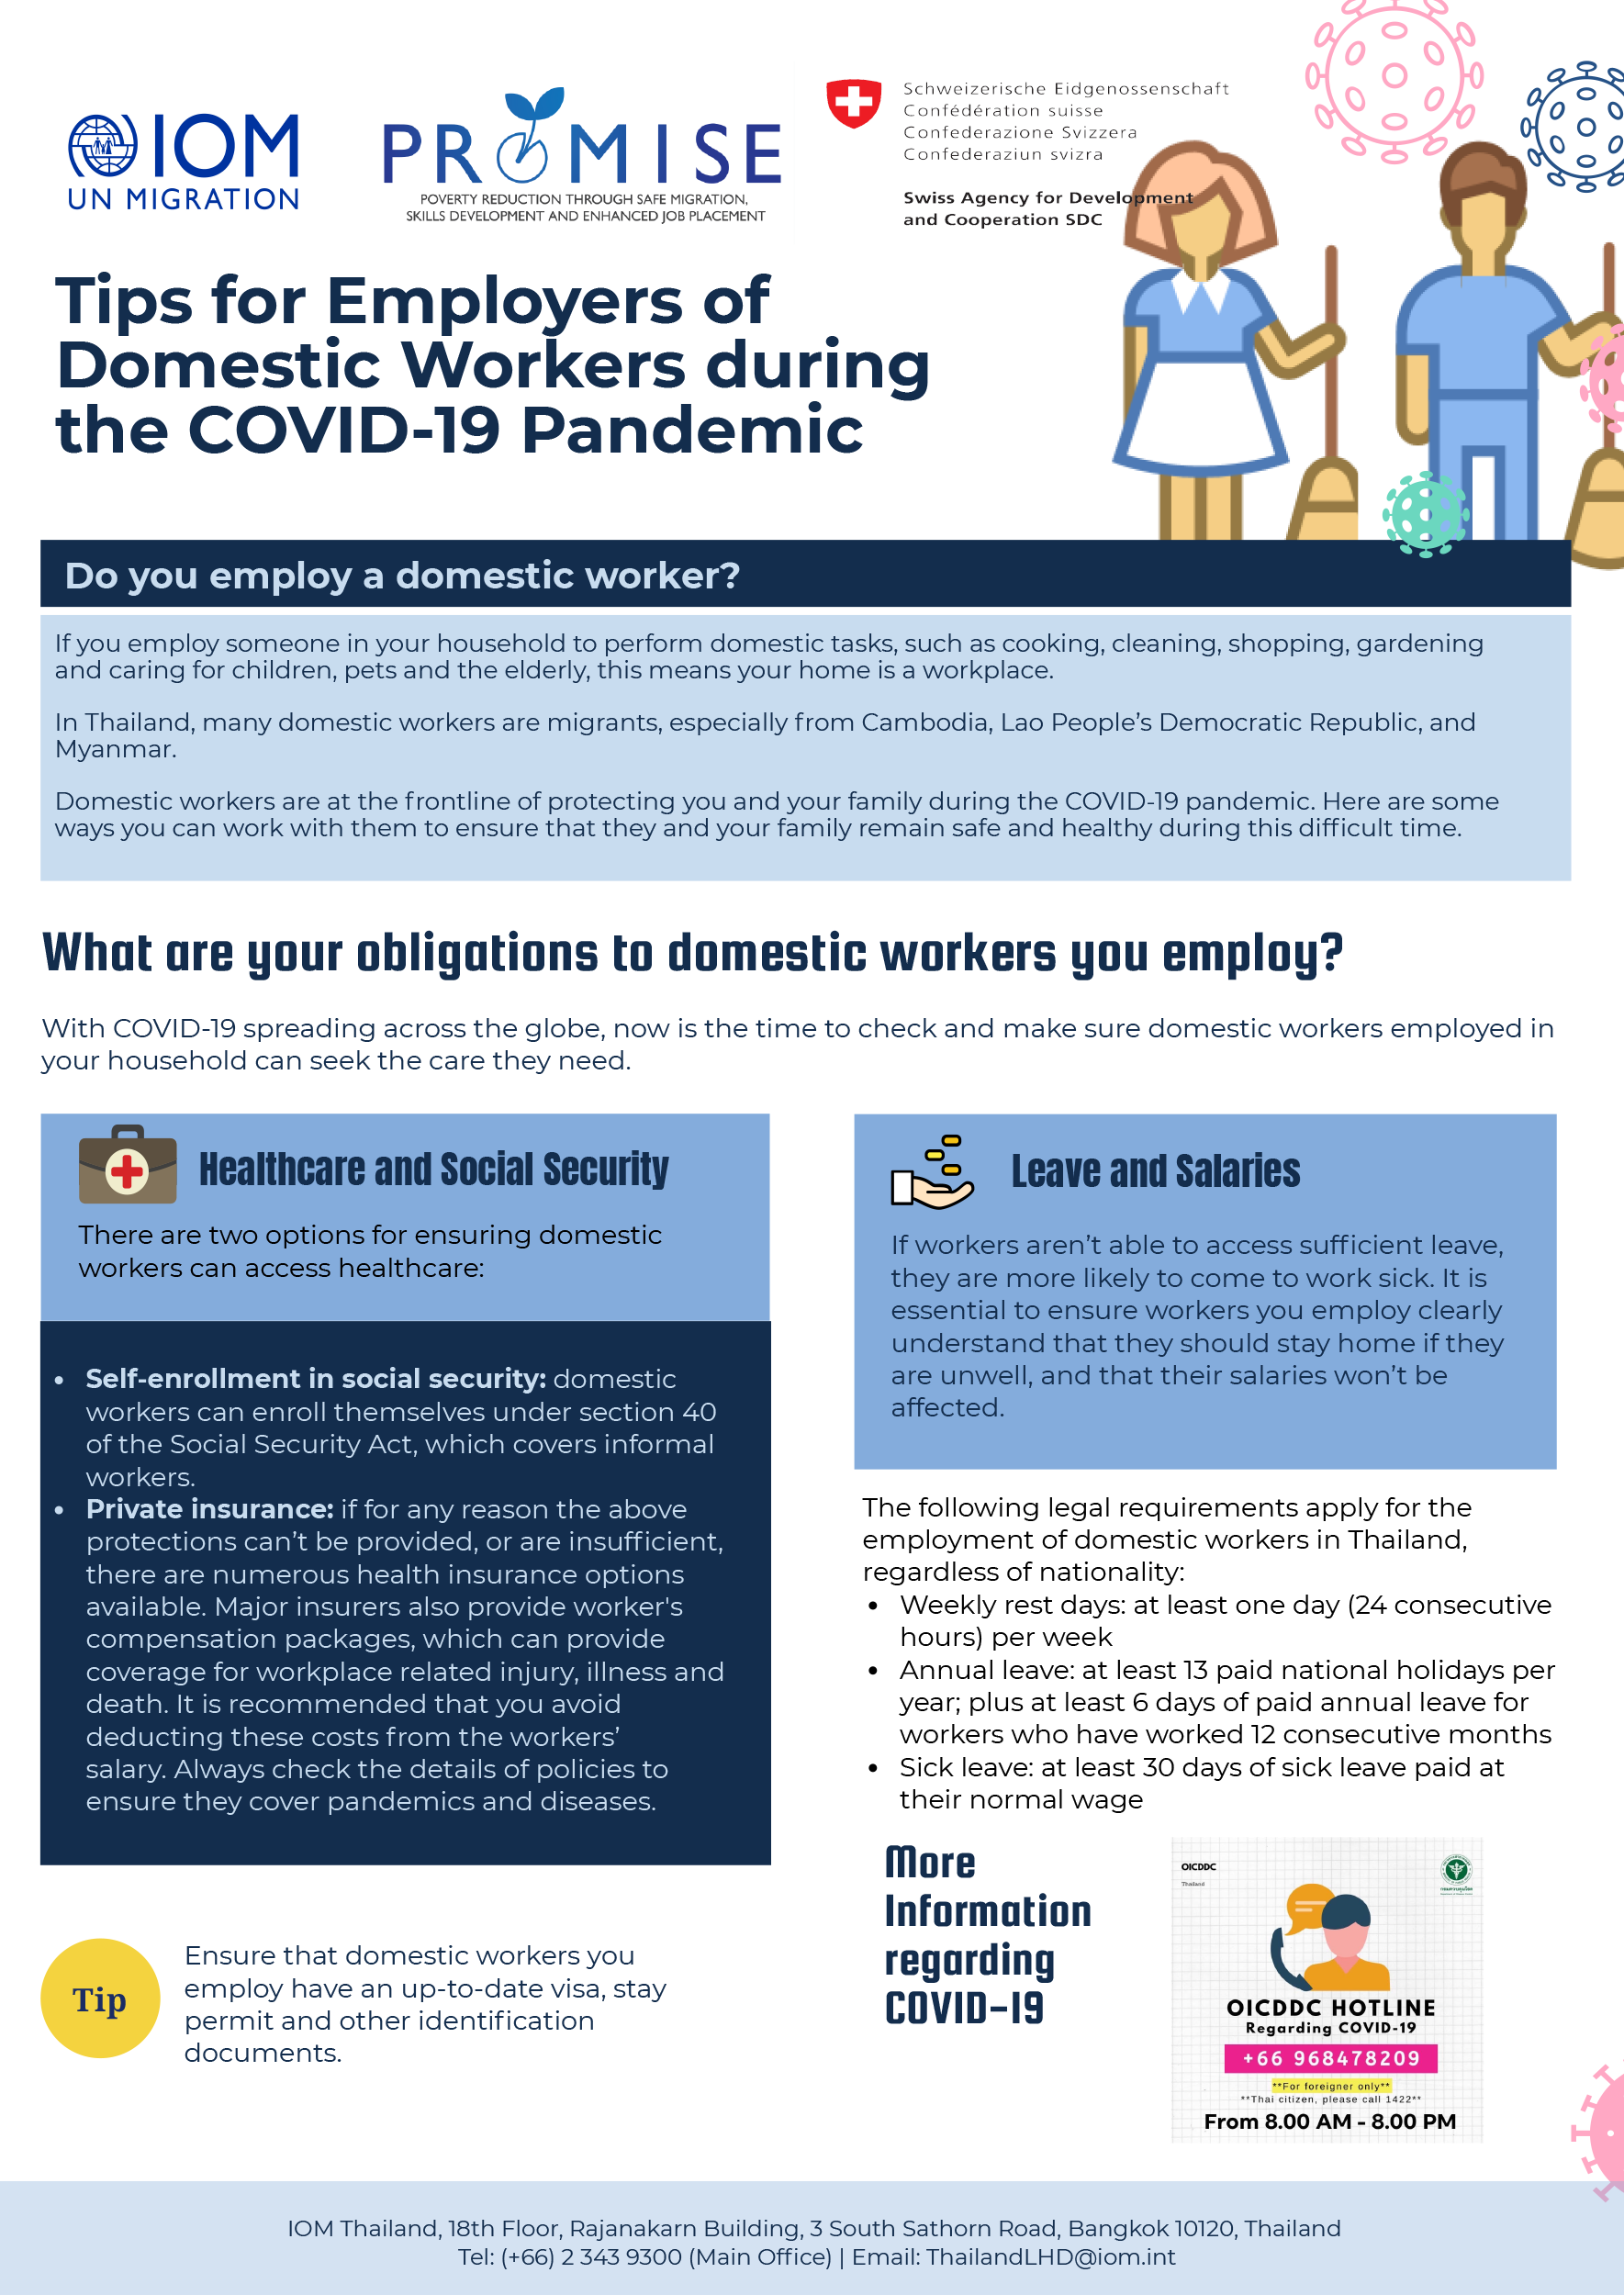 Tips for Employers of Domestic Workers during the COVID-19 Pandemic